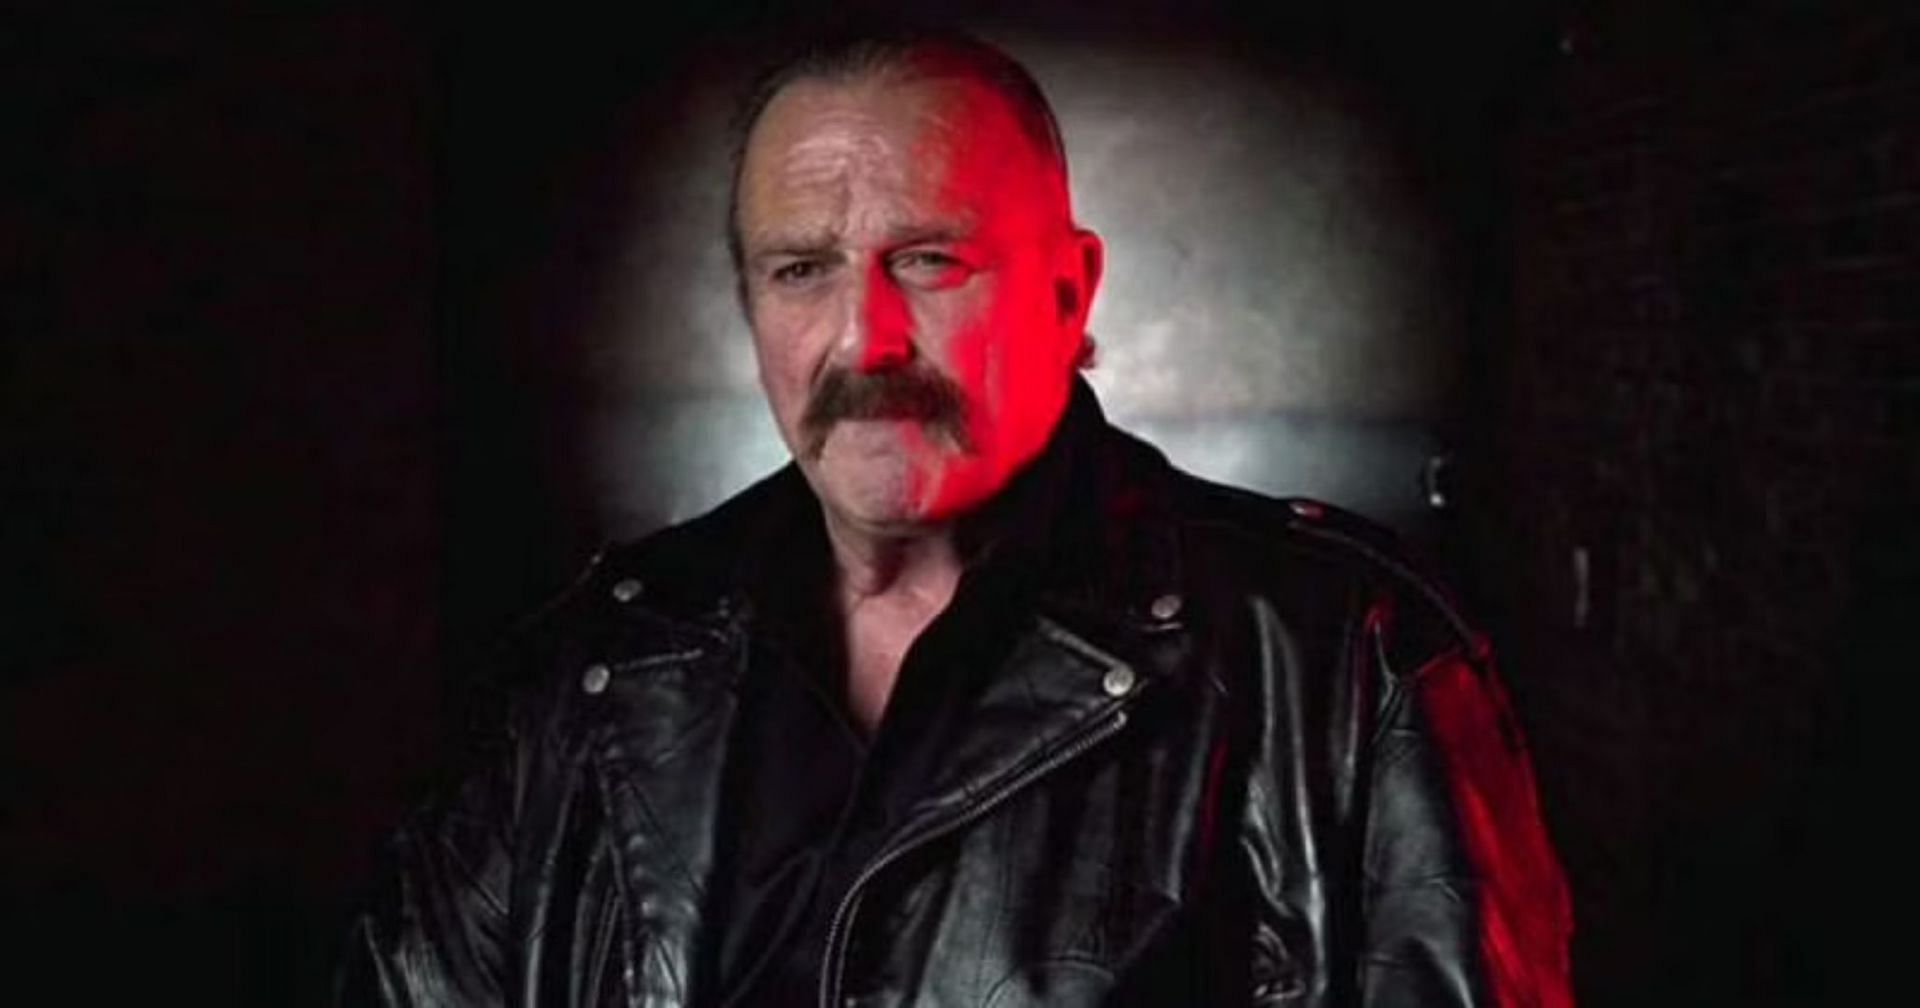 Jake Roberts is a WWE Hall of Famer.